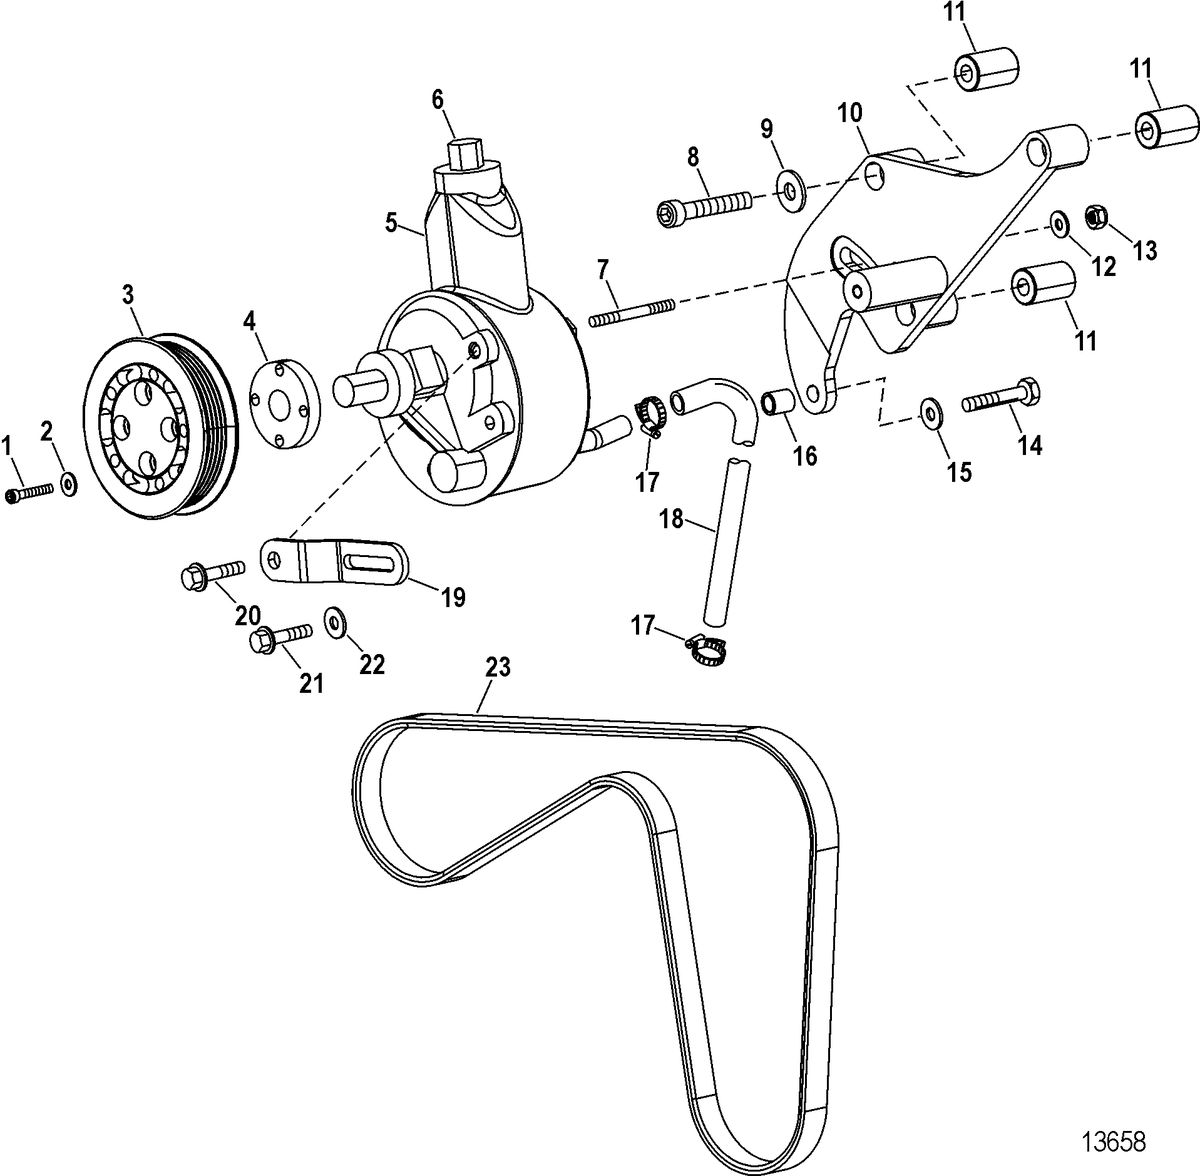 RACE STERNDRIVE 850 SCI Power-Assisted Steering Components(Design I)